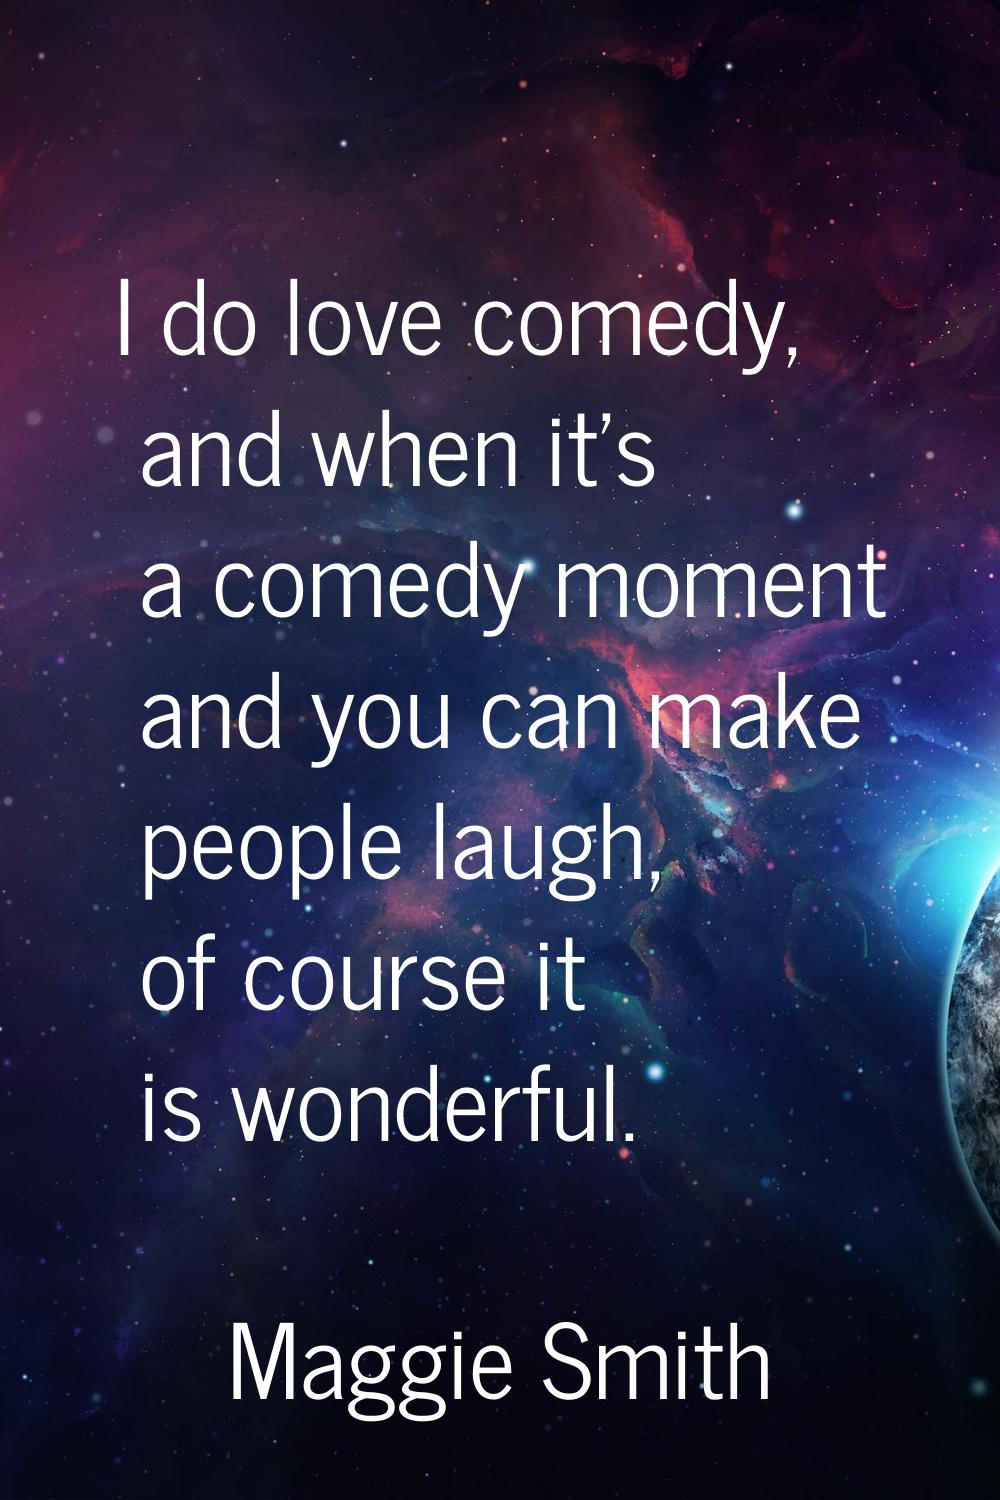 I do love comedy, and when it's a comedy moment and you can make people laugh, of course it is wond